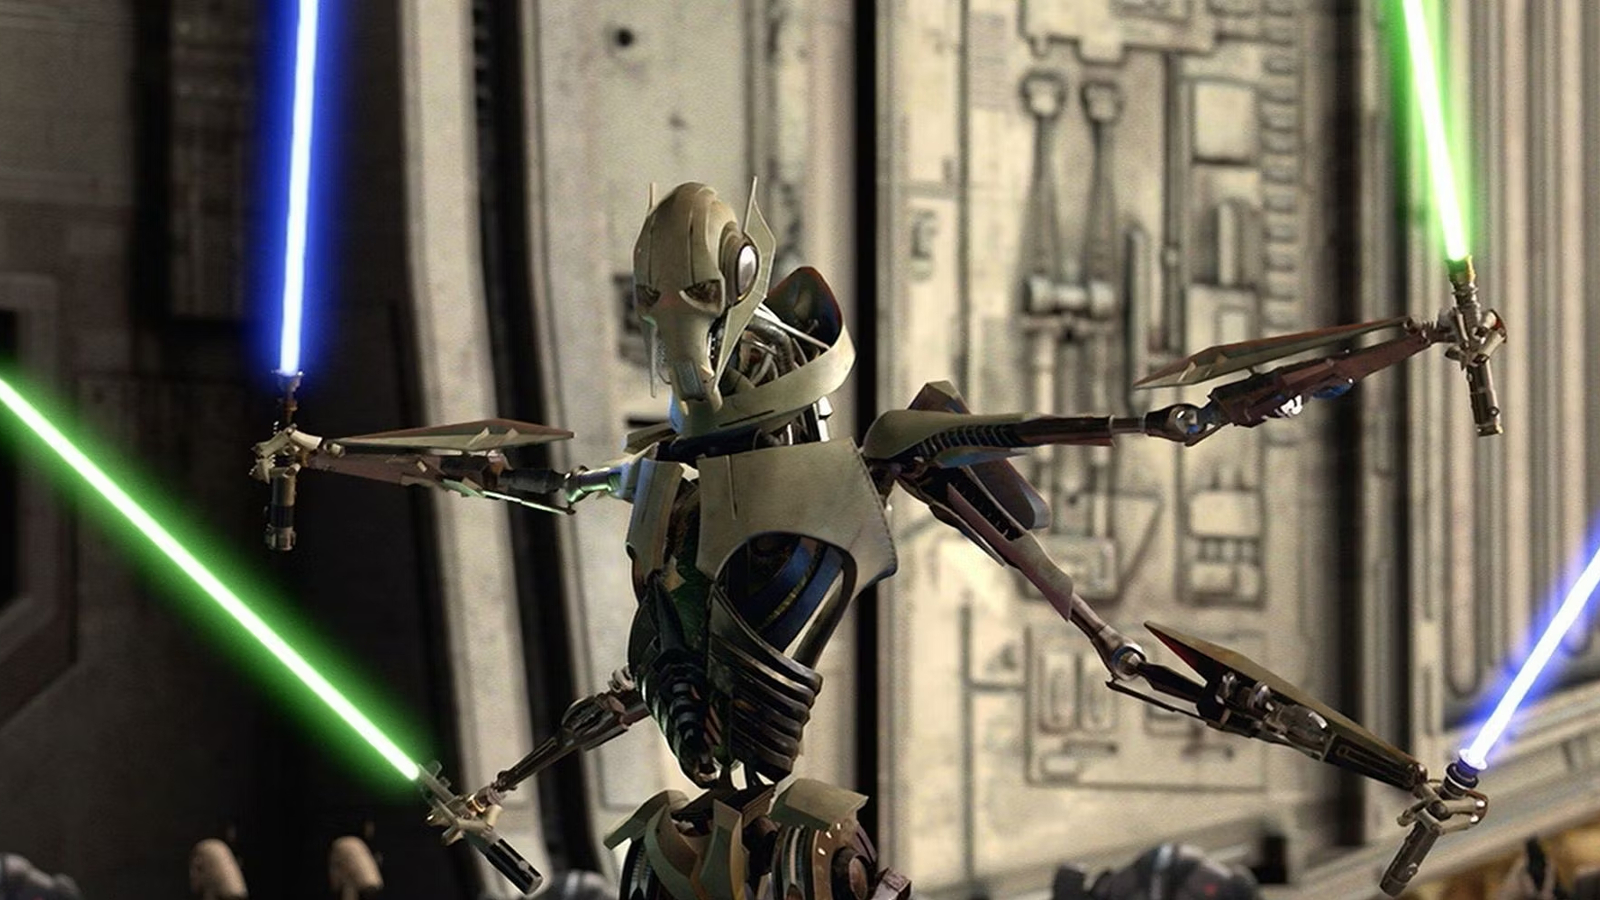 General Grievous wielding four lightsabers in Star Wars: Revenge of the Sith